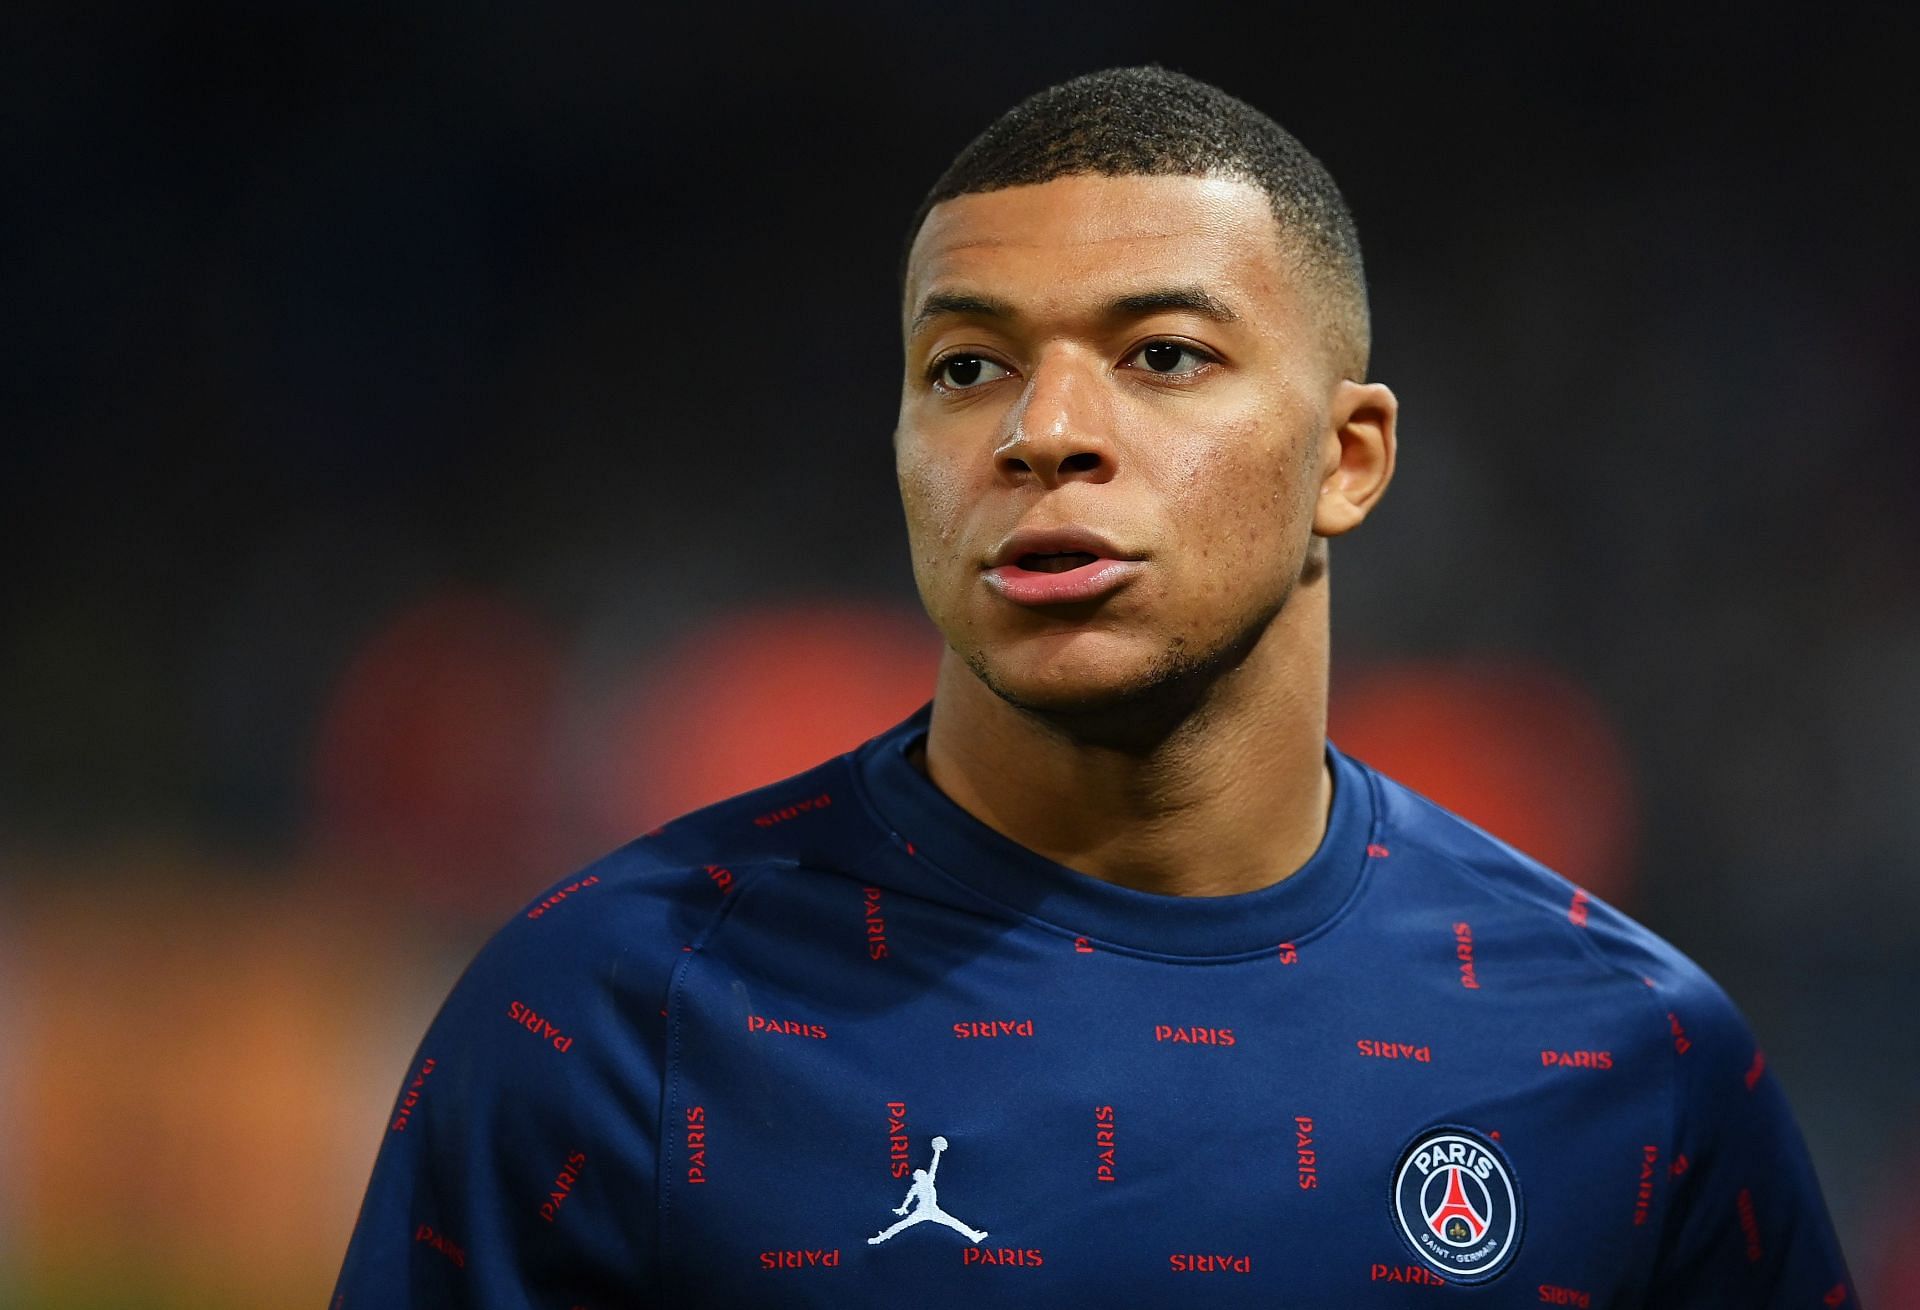 Real Madrid are preparing an offer for Kylian Mbappe.